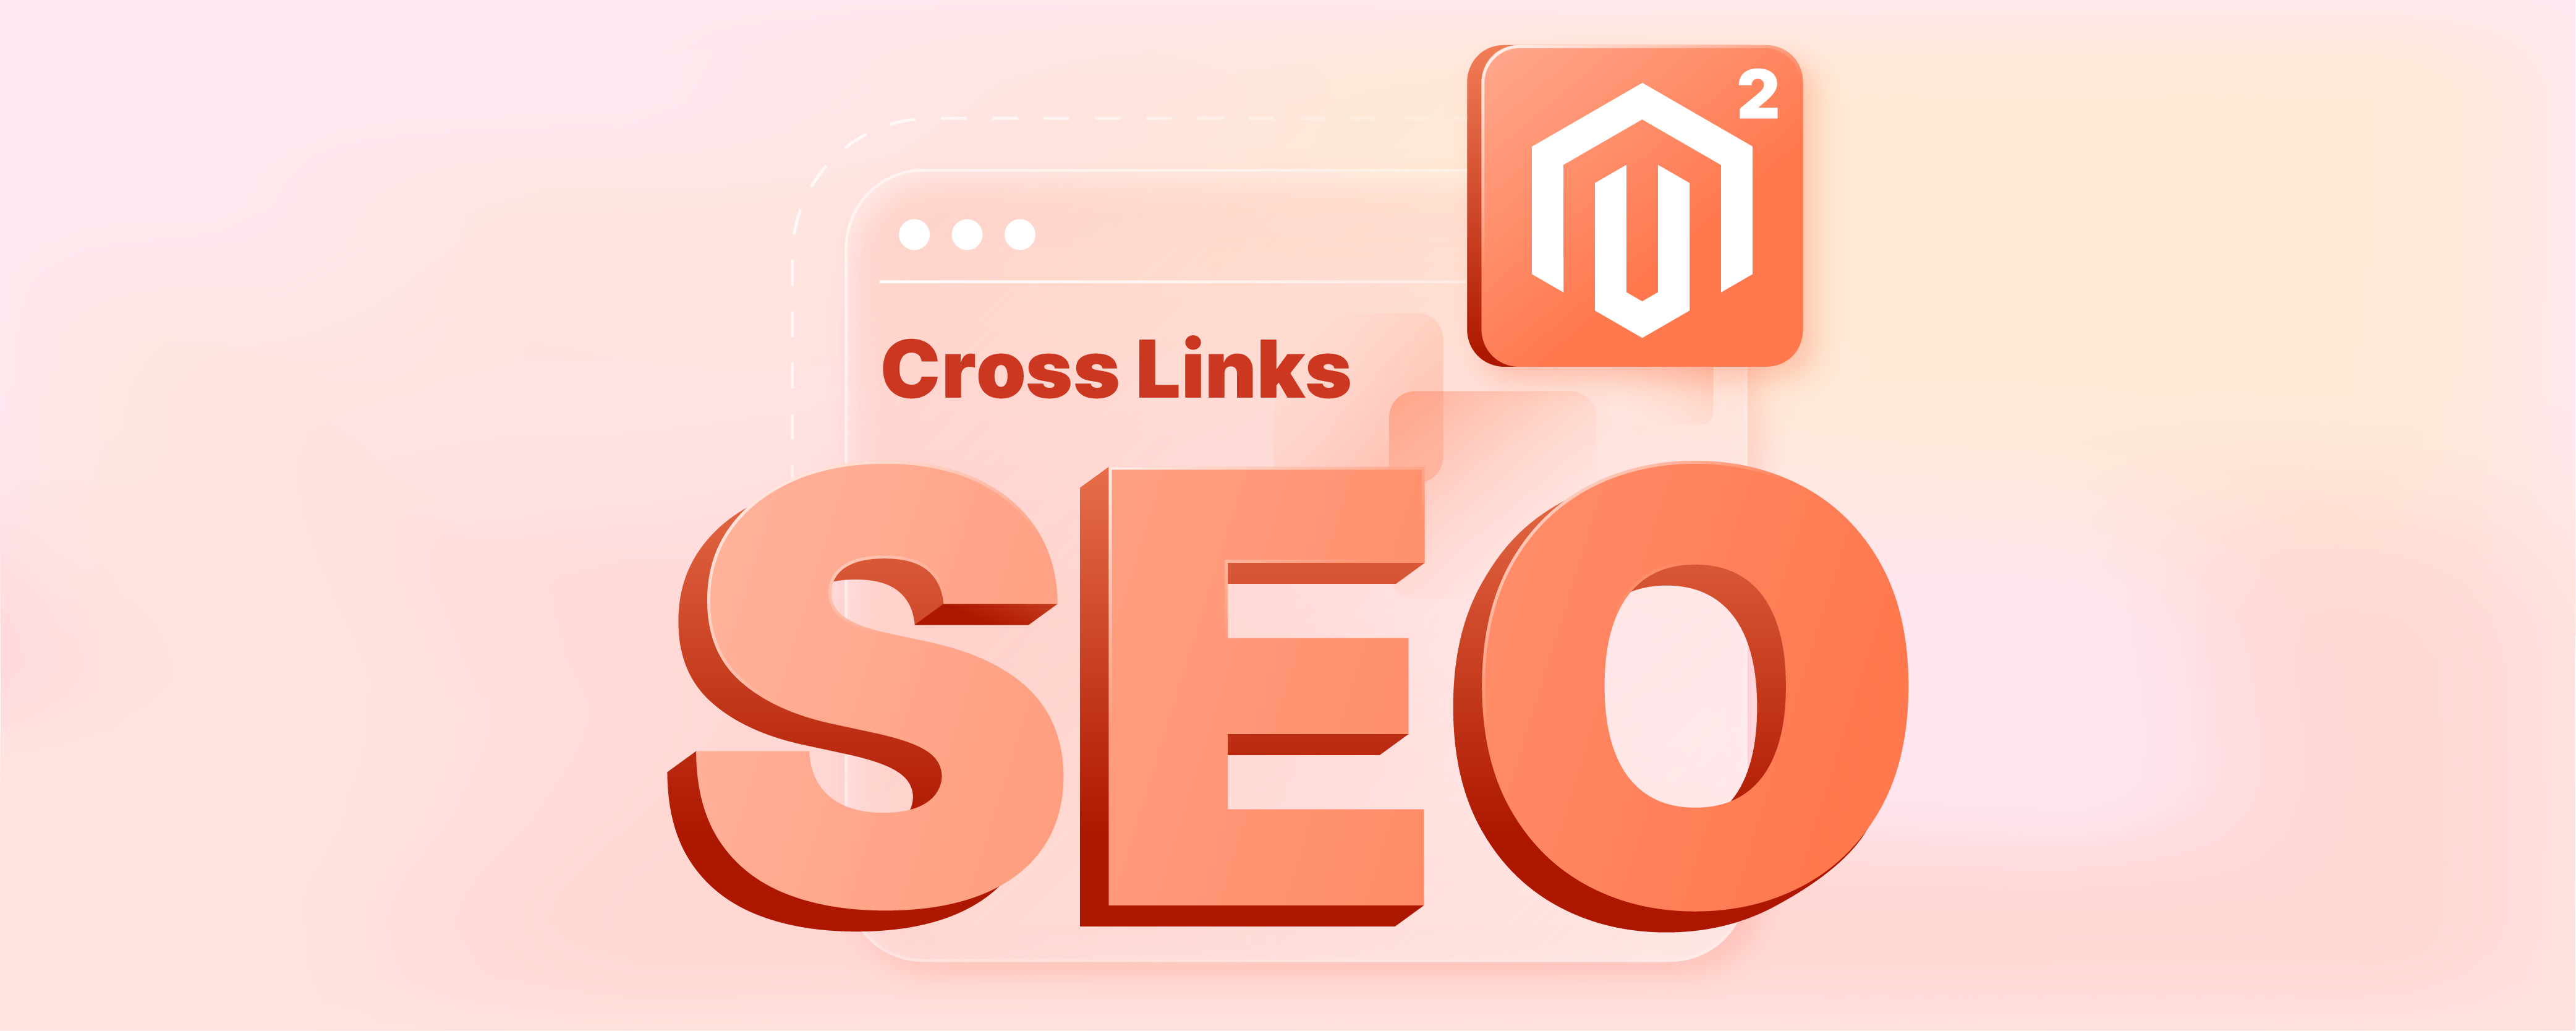 Magento 2 Cross Links SEO Extension to Boost Link Building